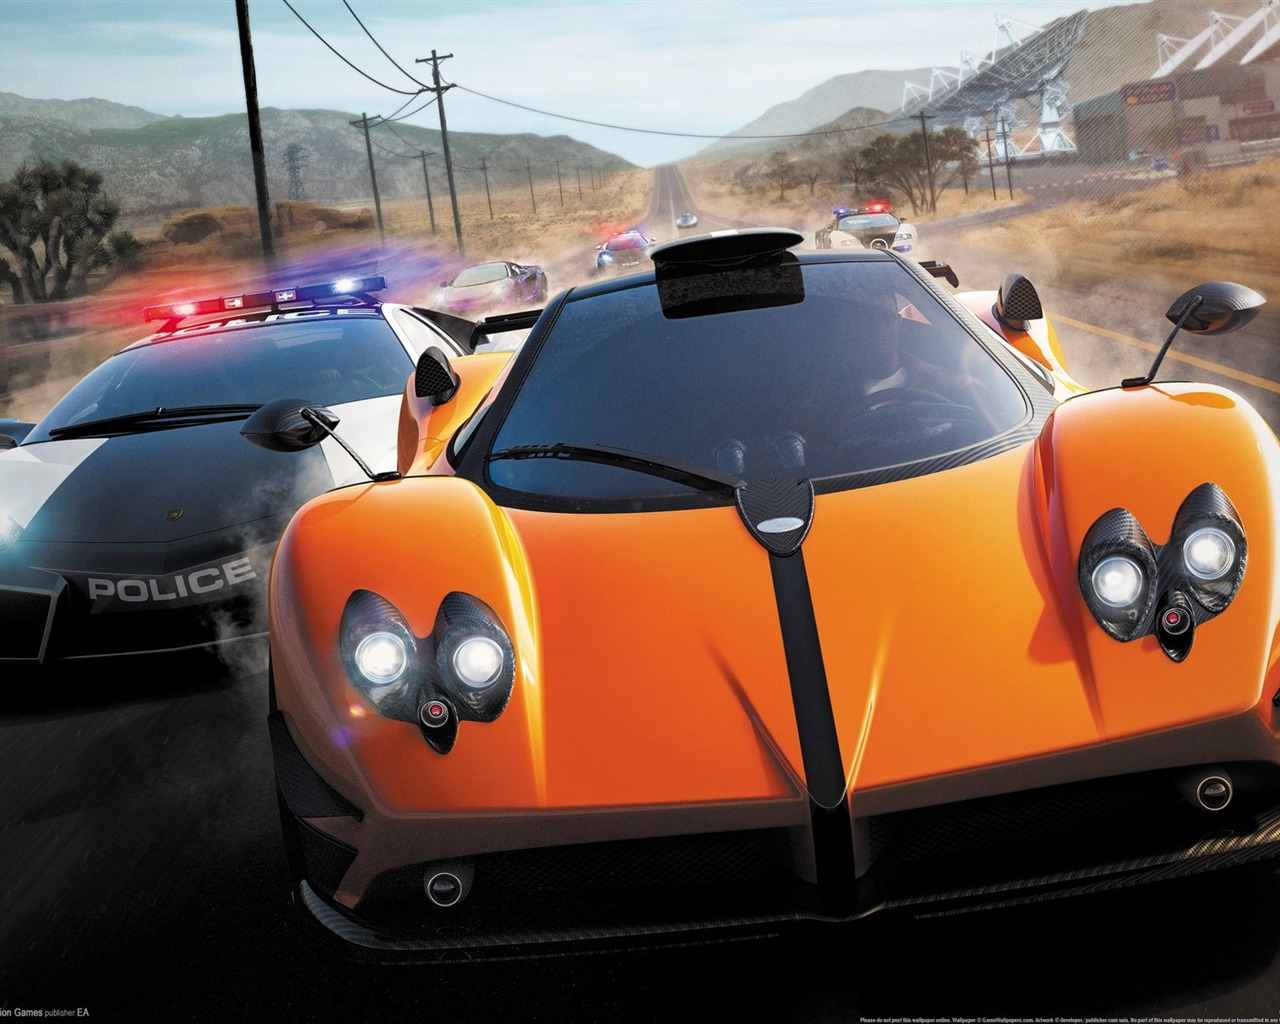 Need for Speed: Hot Pursuit 极品飞车14：热力追踪2 - 1280x1024